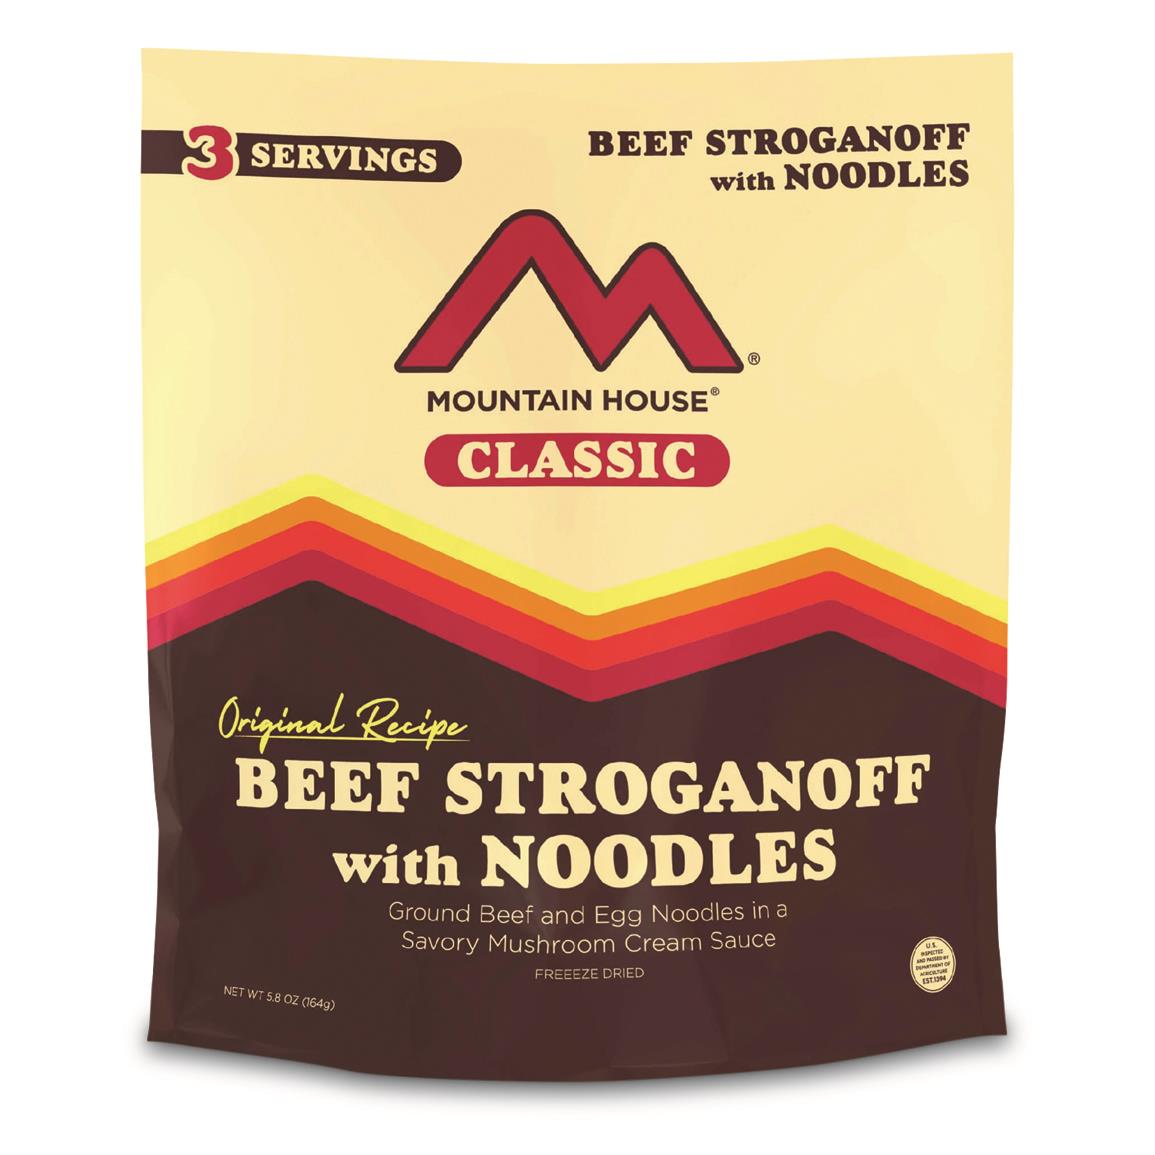 Mountain House Classic Beef Stroganoff with Noodles